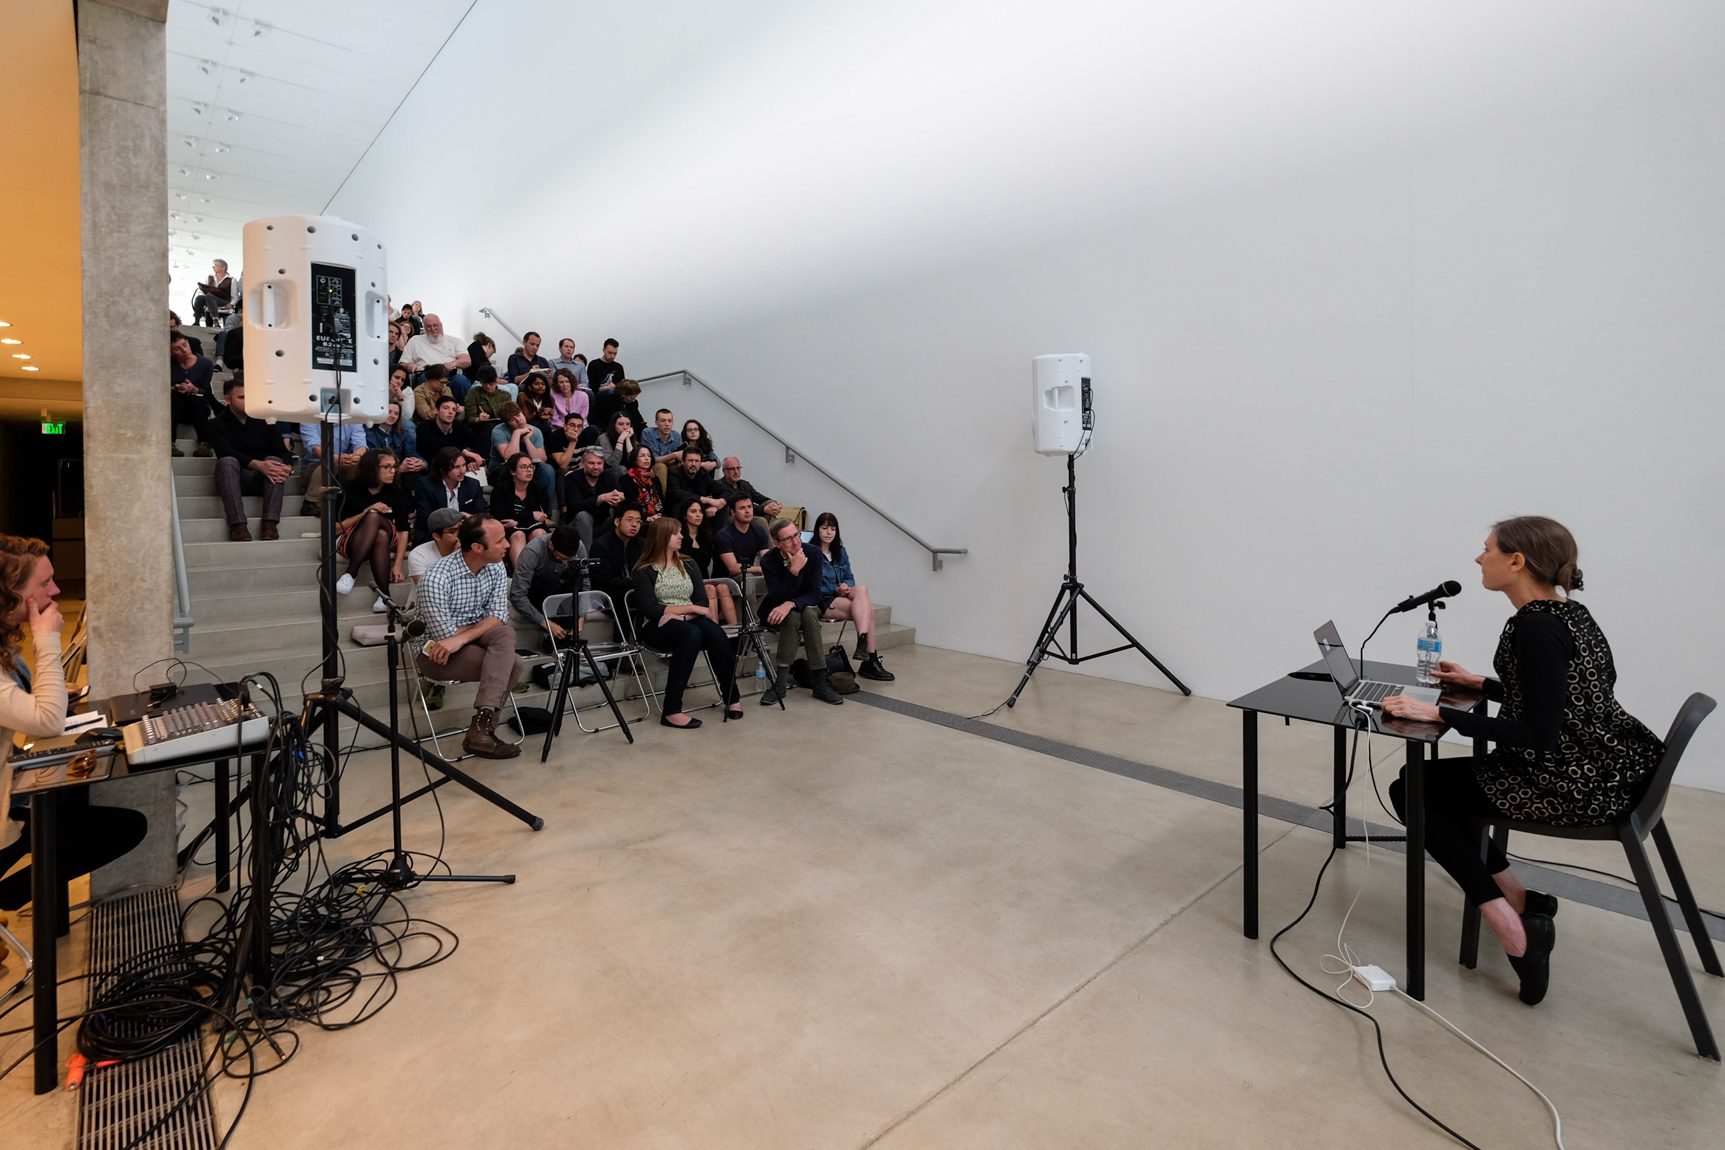 Keller Easterling gives a presentation in the Lower-Main Gallery to an audience on the Main Staircase. Easterling is seated behind a table with a microphone.